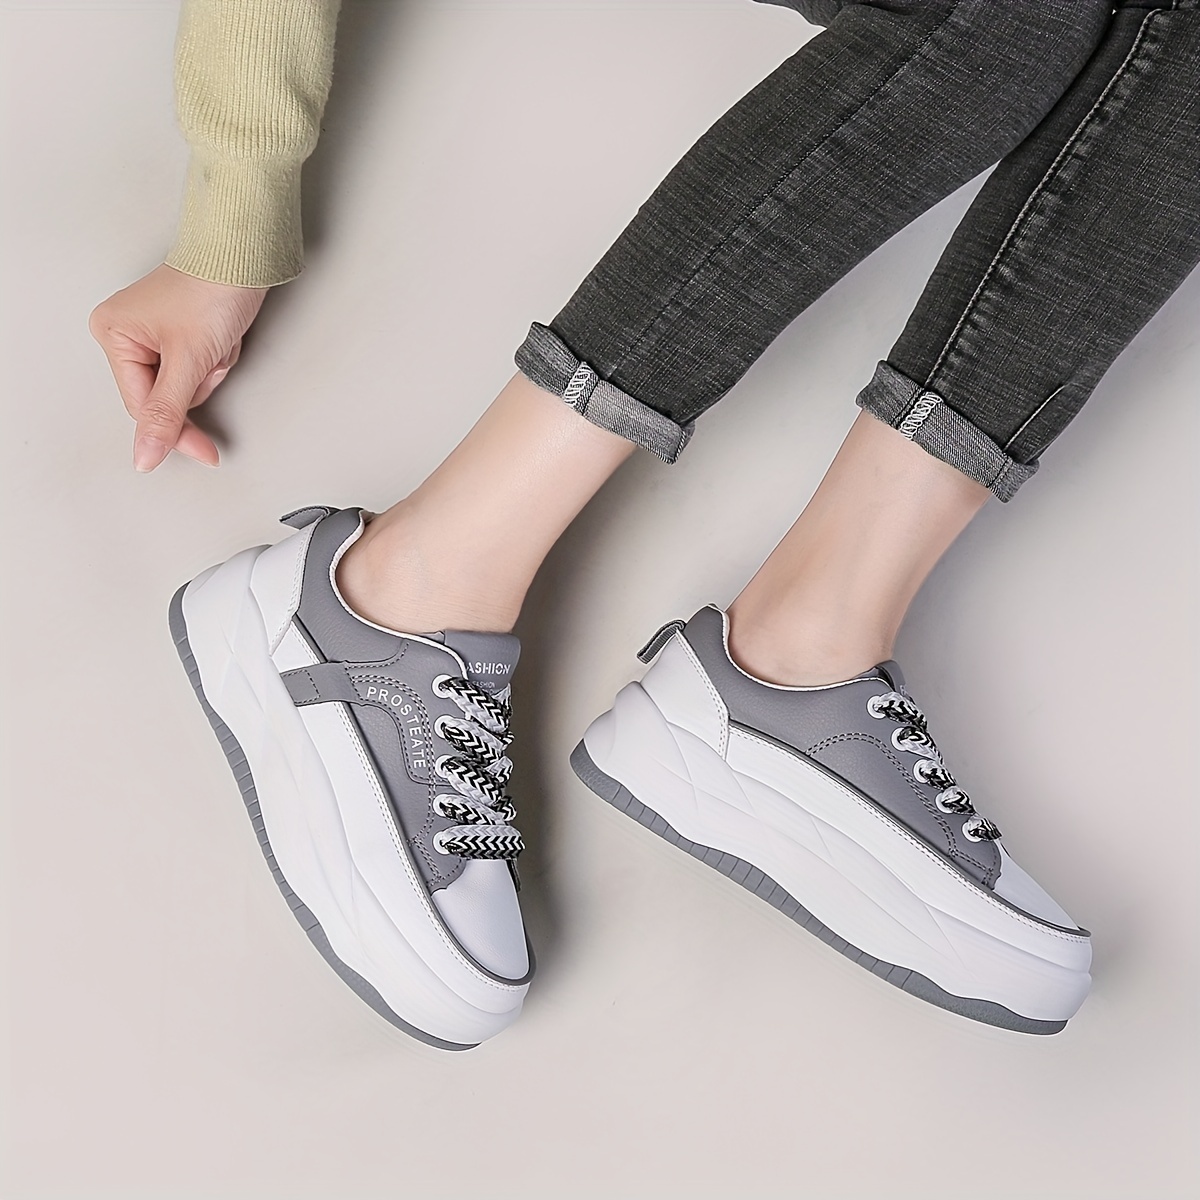 Women's White Platform Sneakers, Casual Lace Up Outdoor, 48% OFF